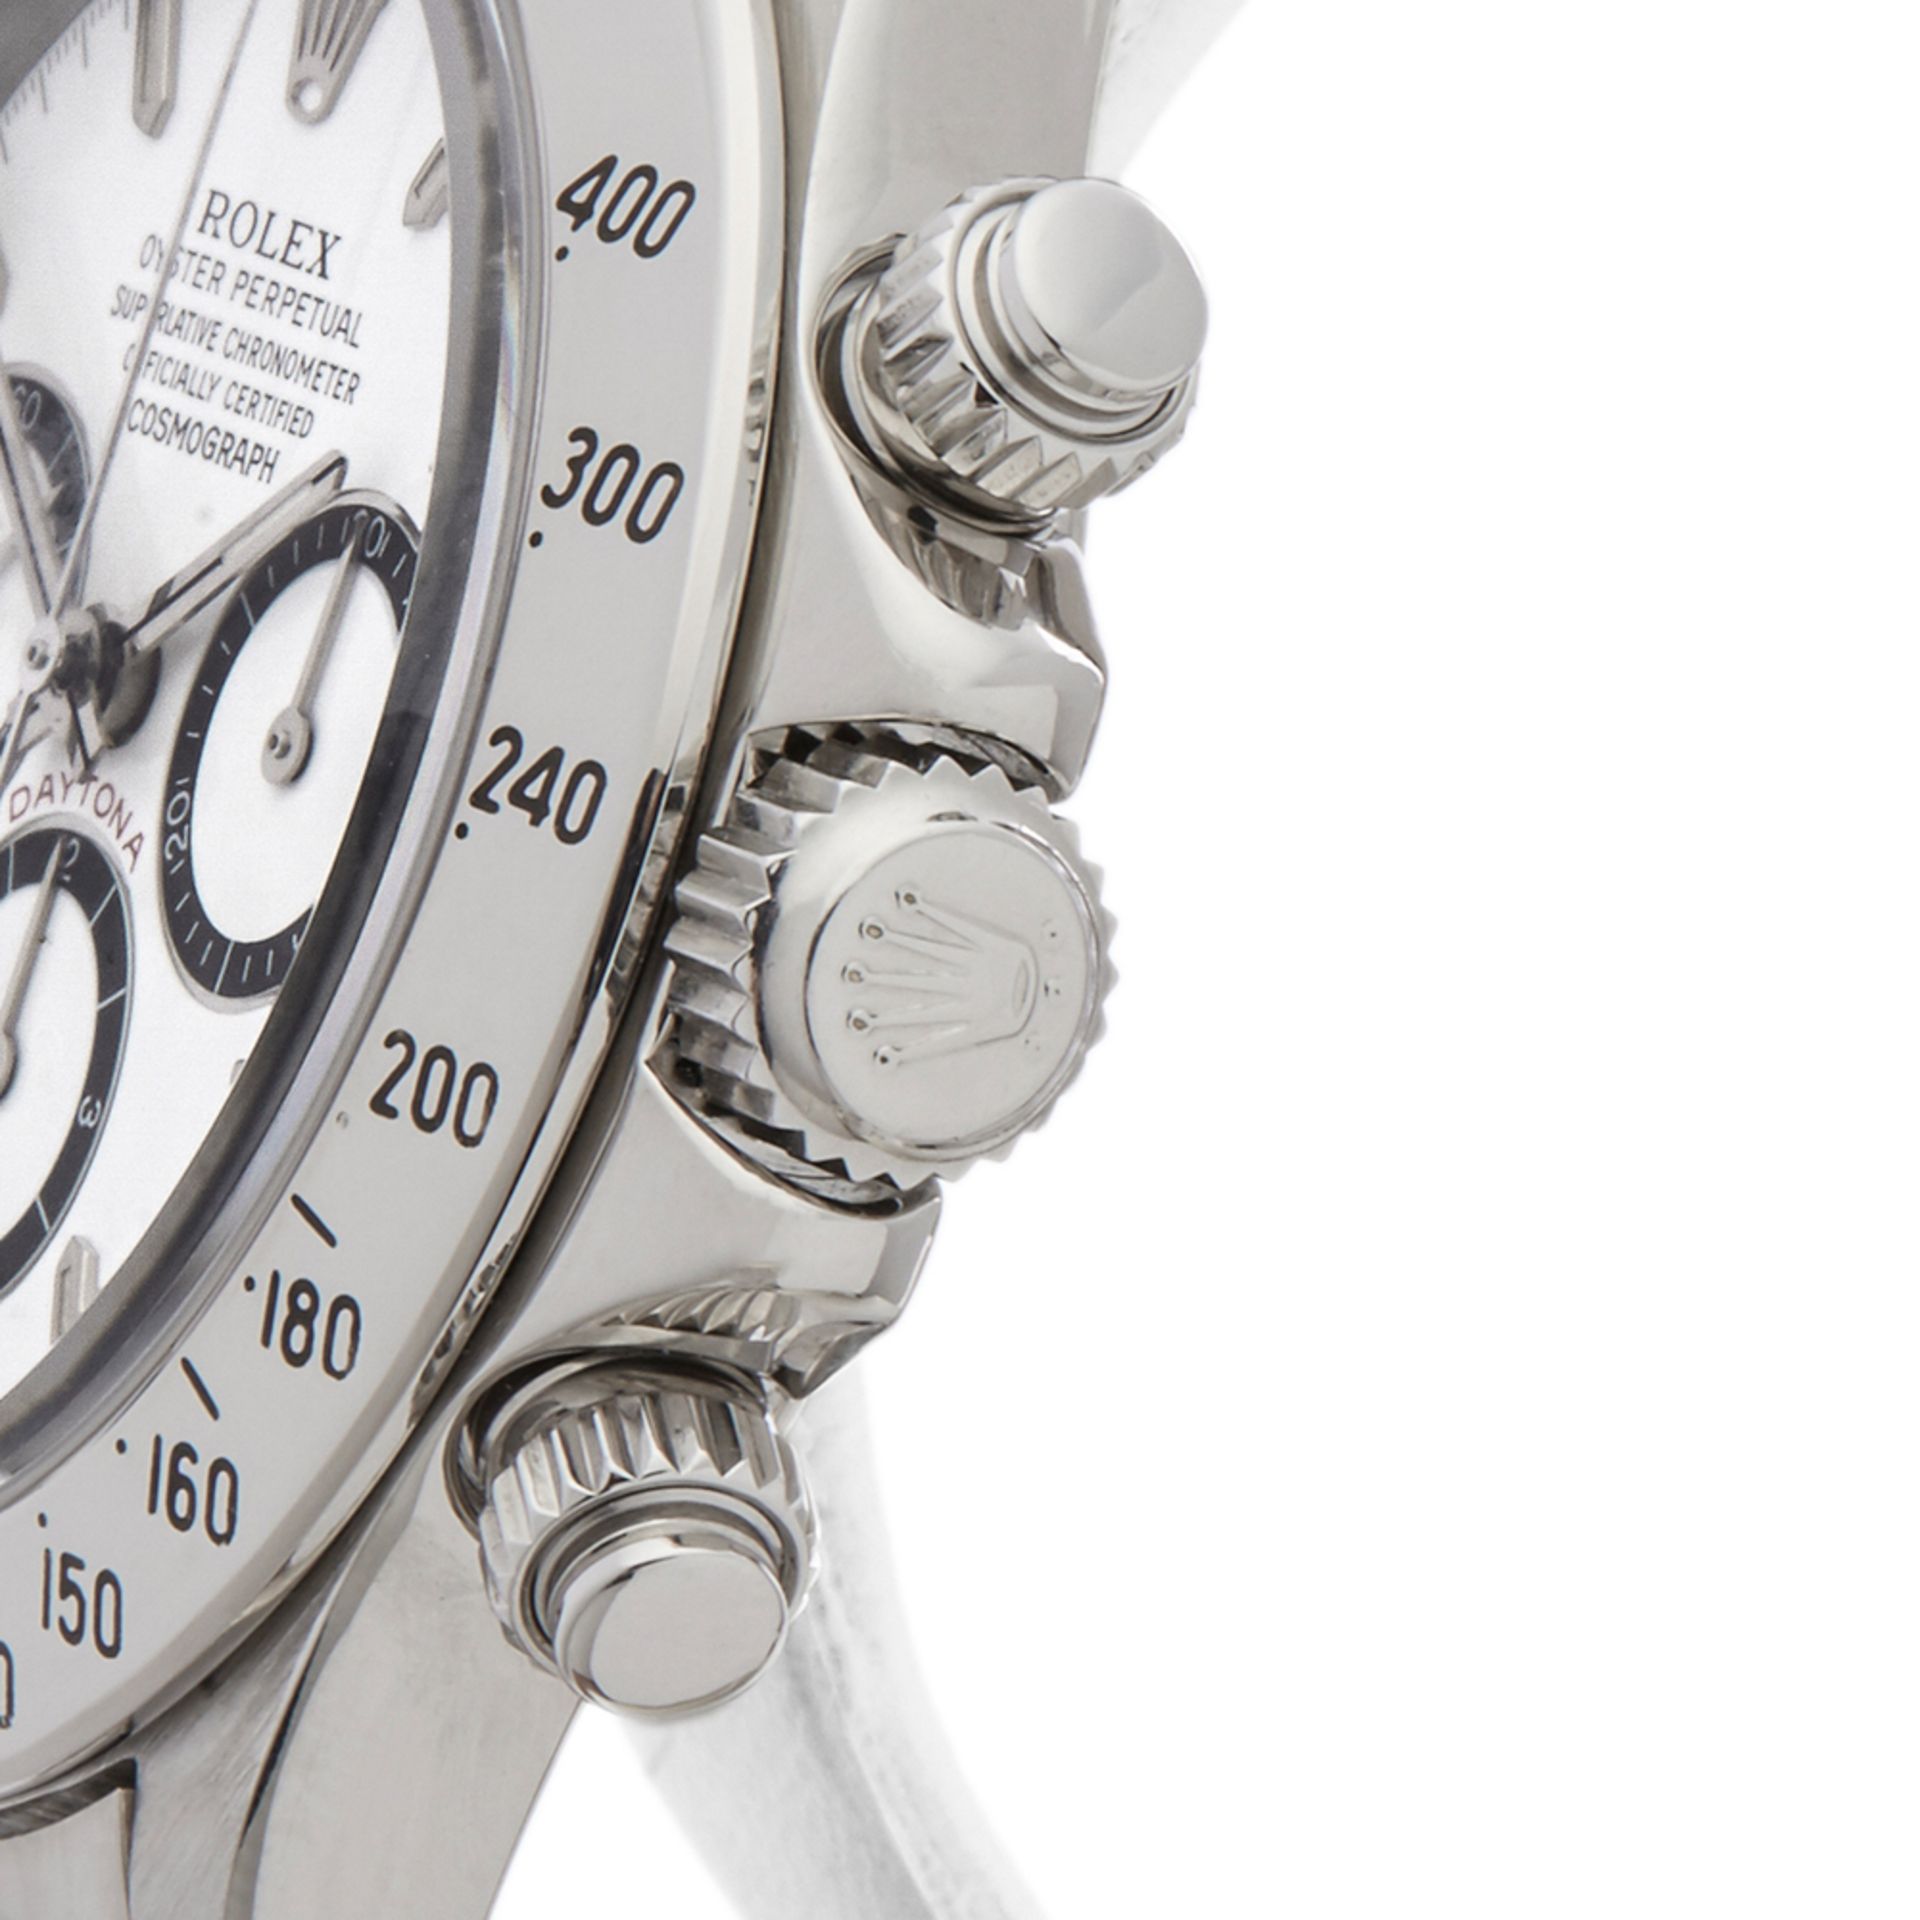 Rolex Daytona Inverted 6 Chronograpgh 40mm Stainless Steel - 16520 - Image 4 of 8